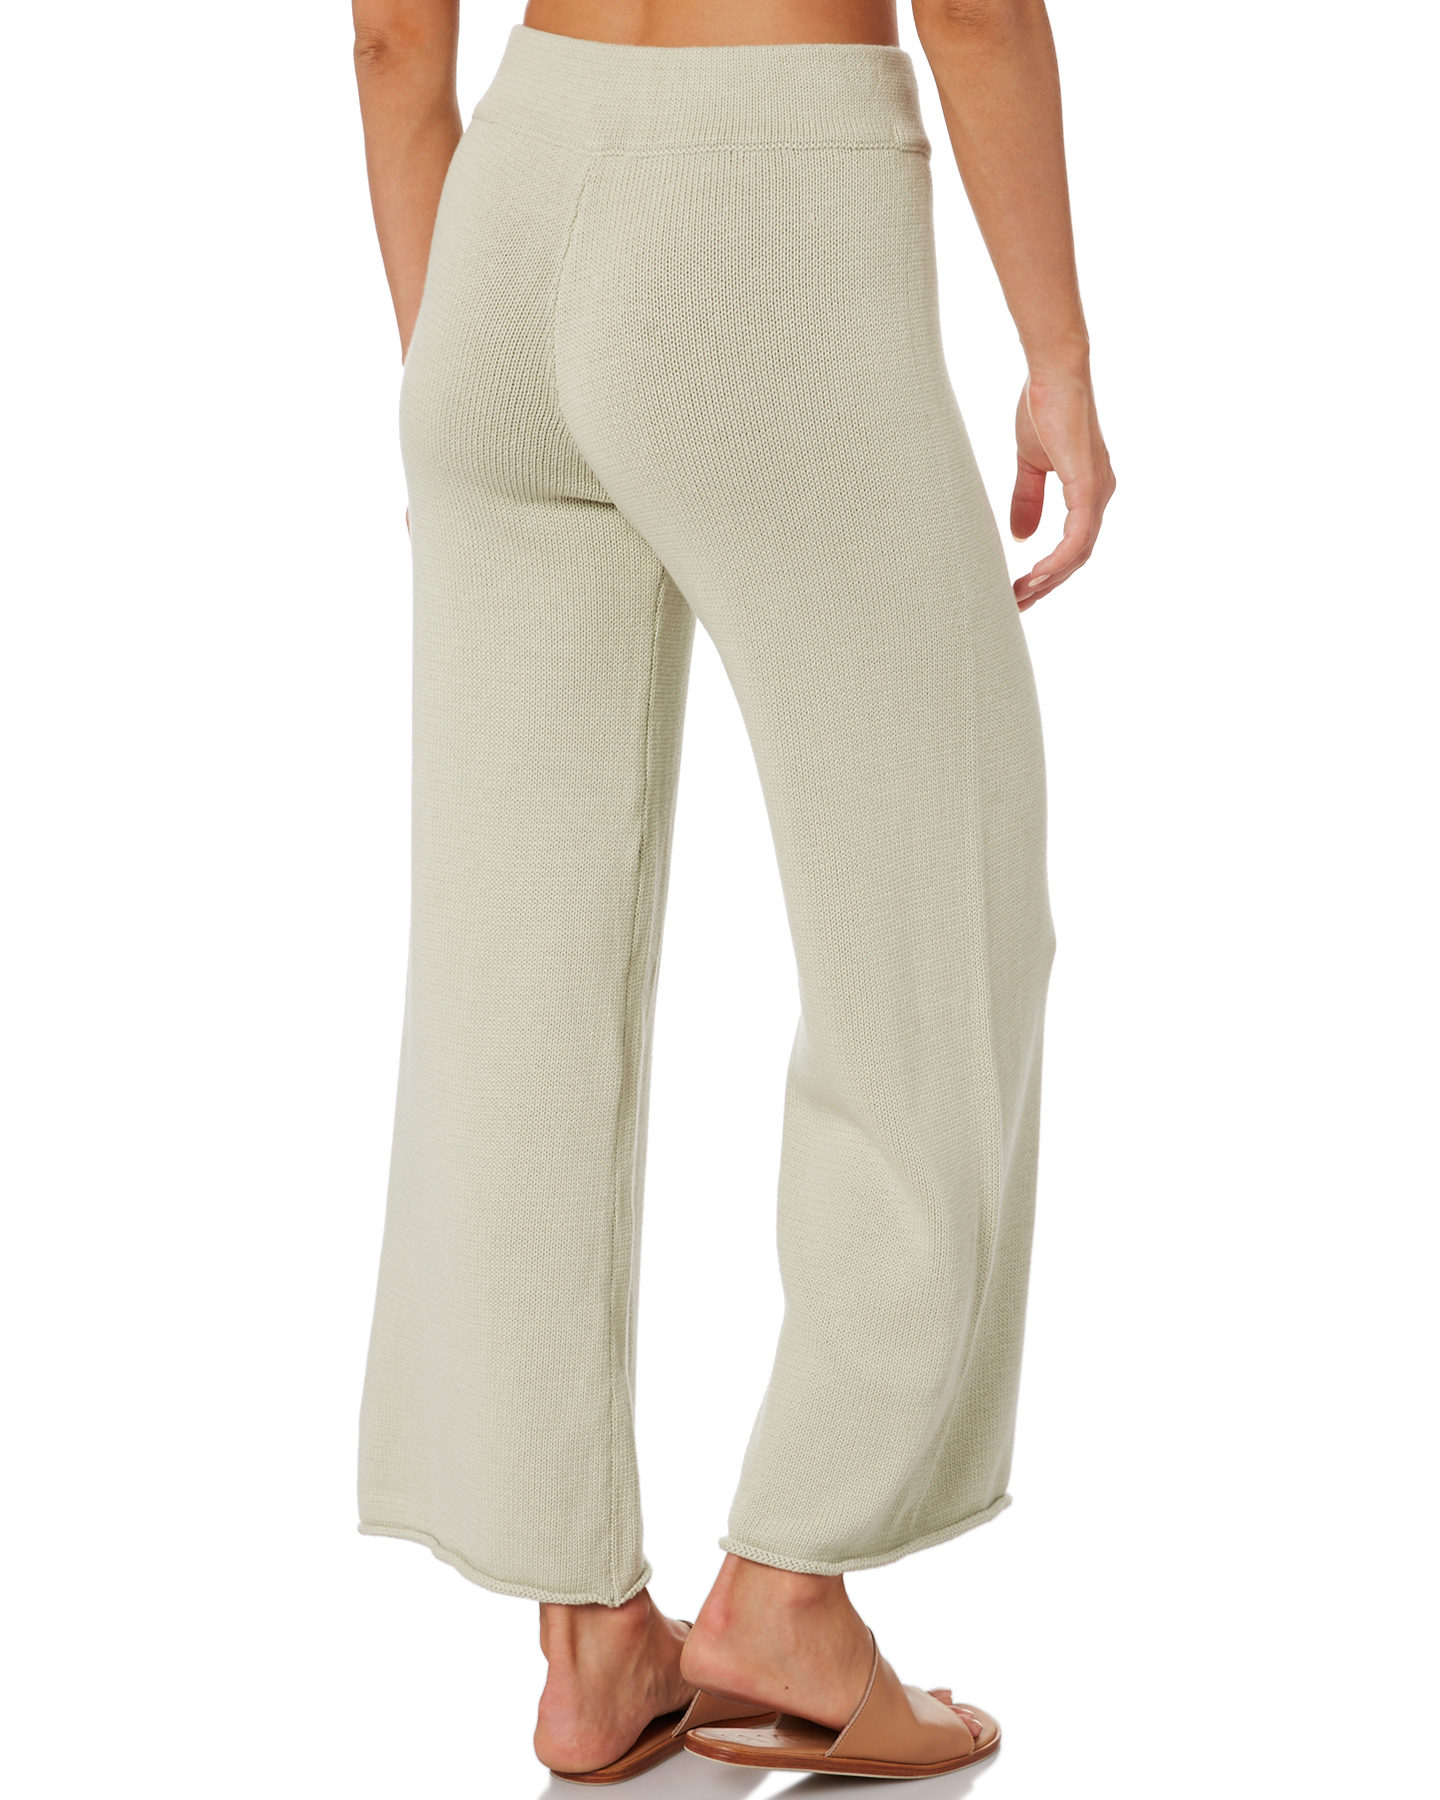 Zulu And Zephyr Relax Knit Pant - Cool Sage | SurfStitch